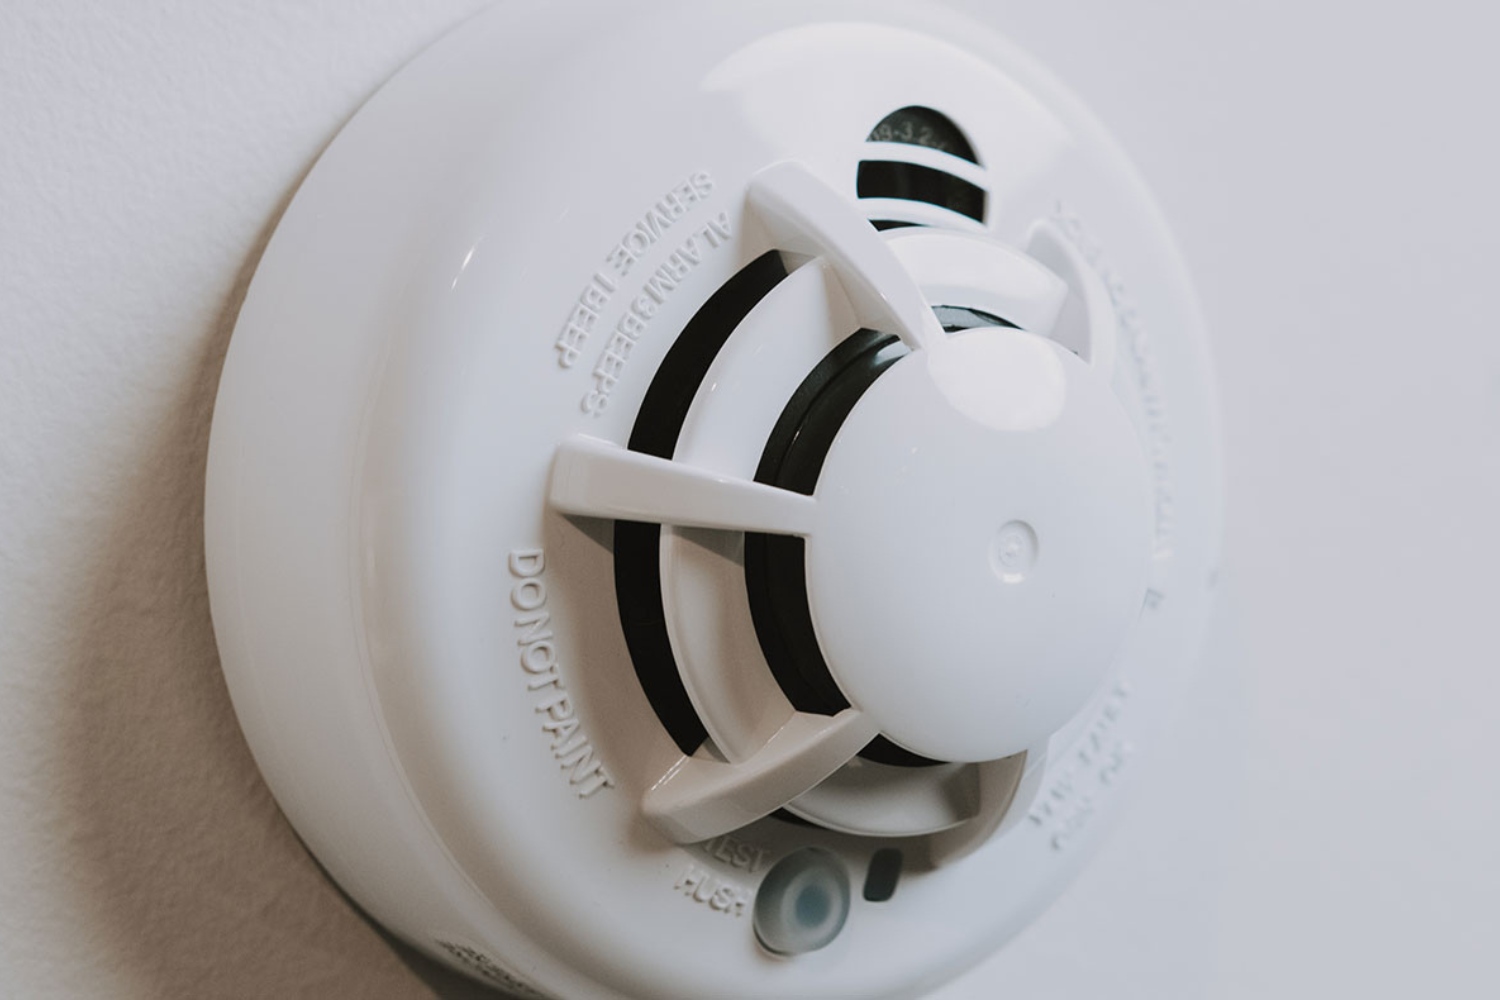 What To Do When A Smoke Detector Keeps Beeping